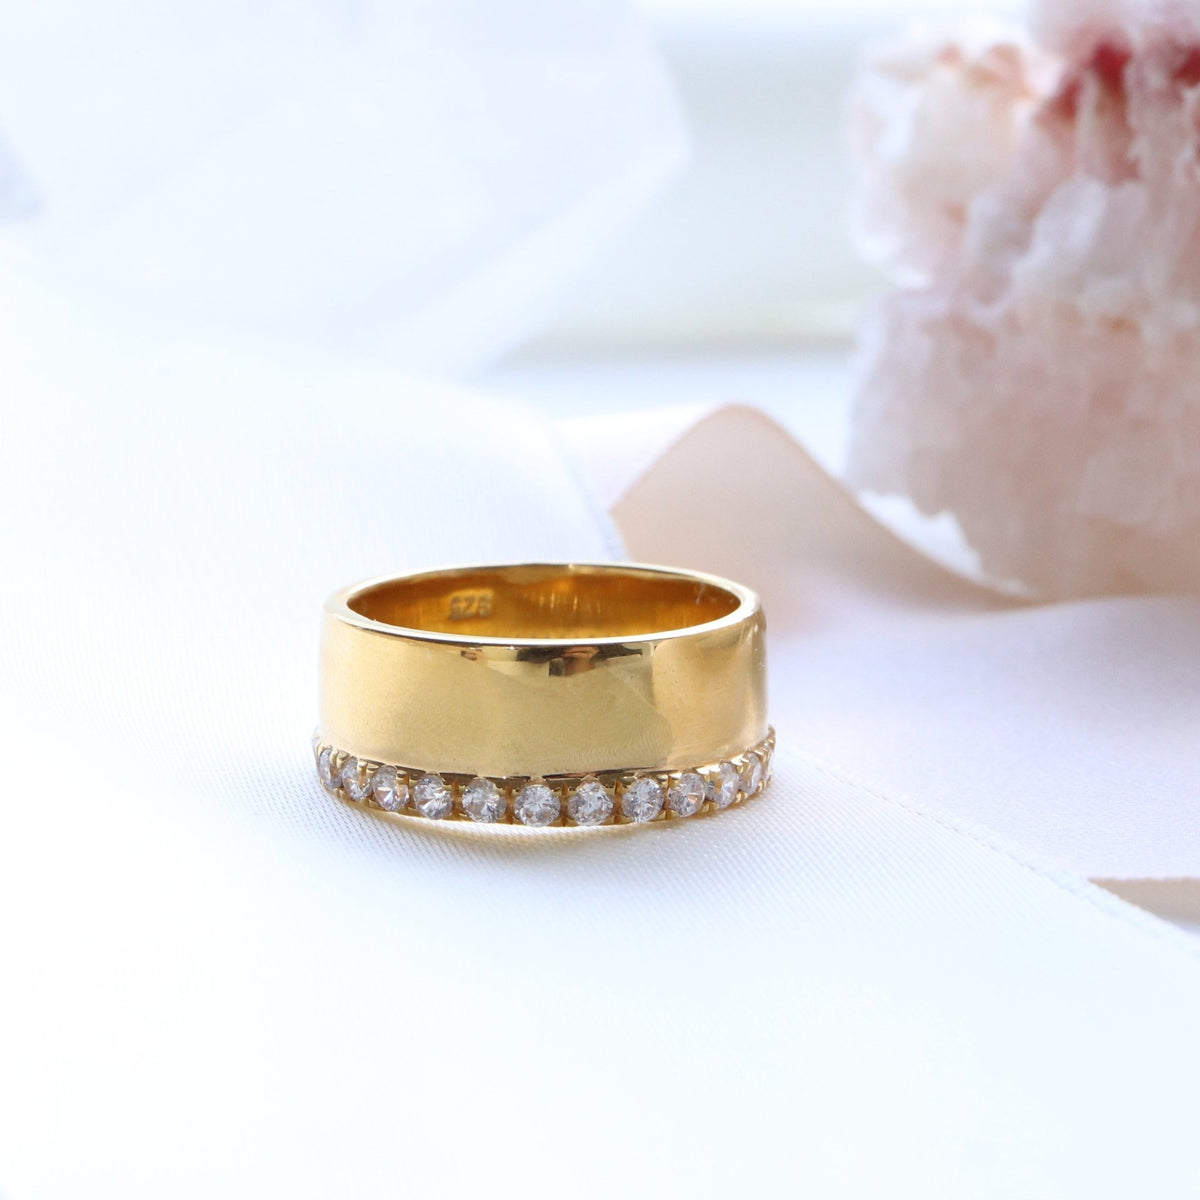 LOVE ETERNITY CIGAR BAND - CUBIC ZIRCONIA &amp; GOLD - SO PRETTY CARA COTTER